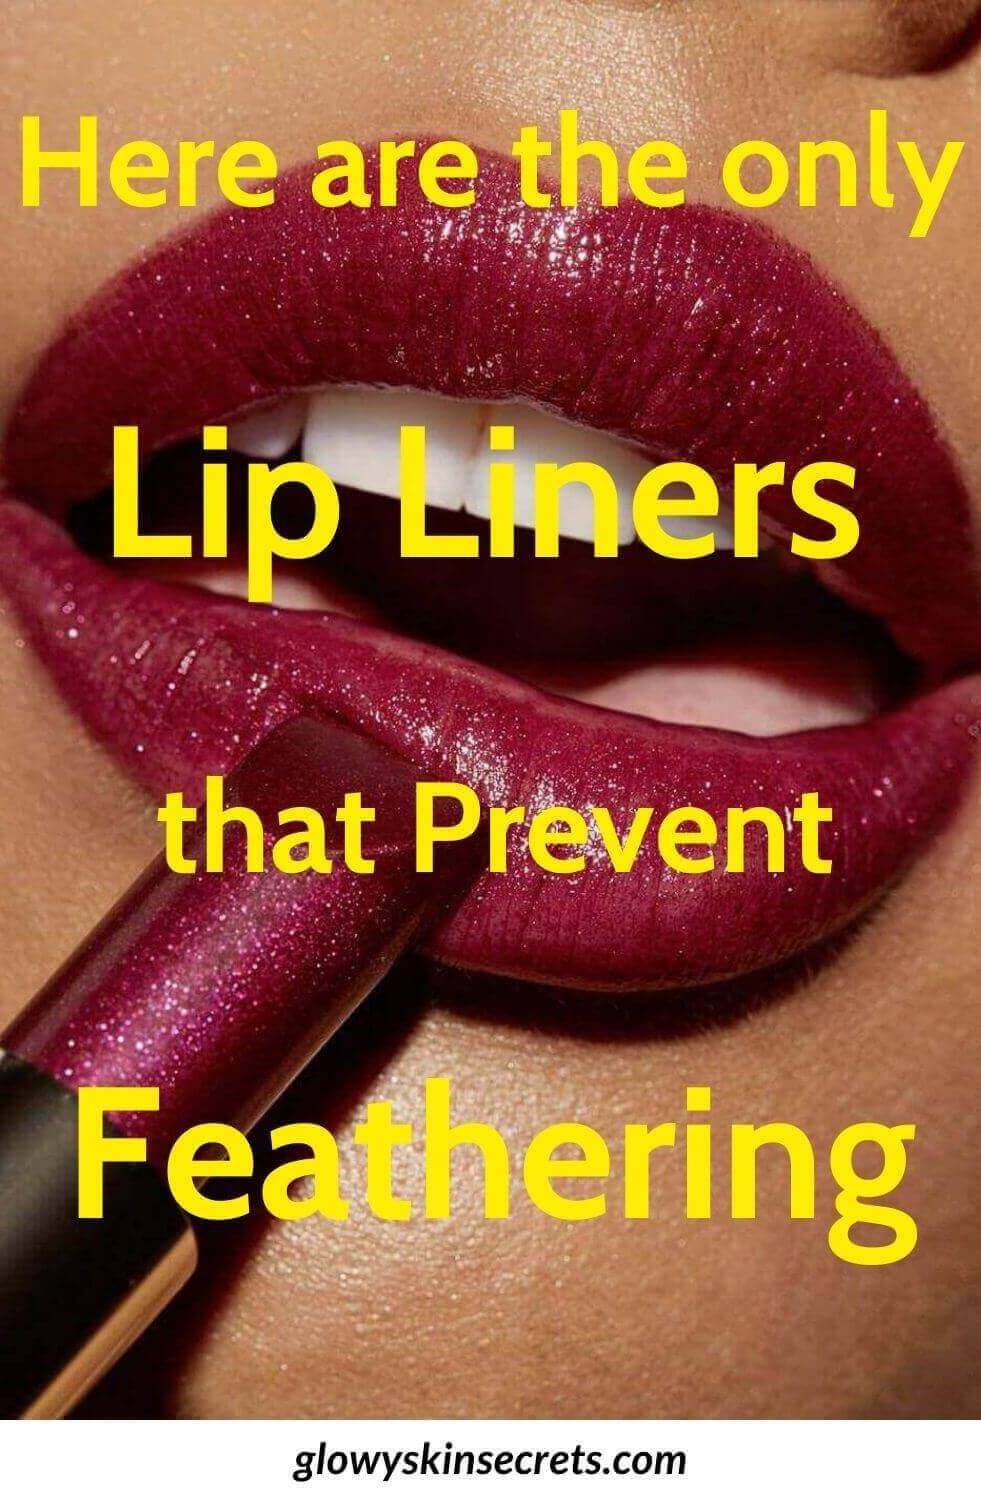 A review of the best lip liner to prevent feathering, best lip liner to stop feathering, best lip liner to stop bleeding, best lip liner to prevent lipstick smudging. Anti feathering lip liner